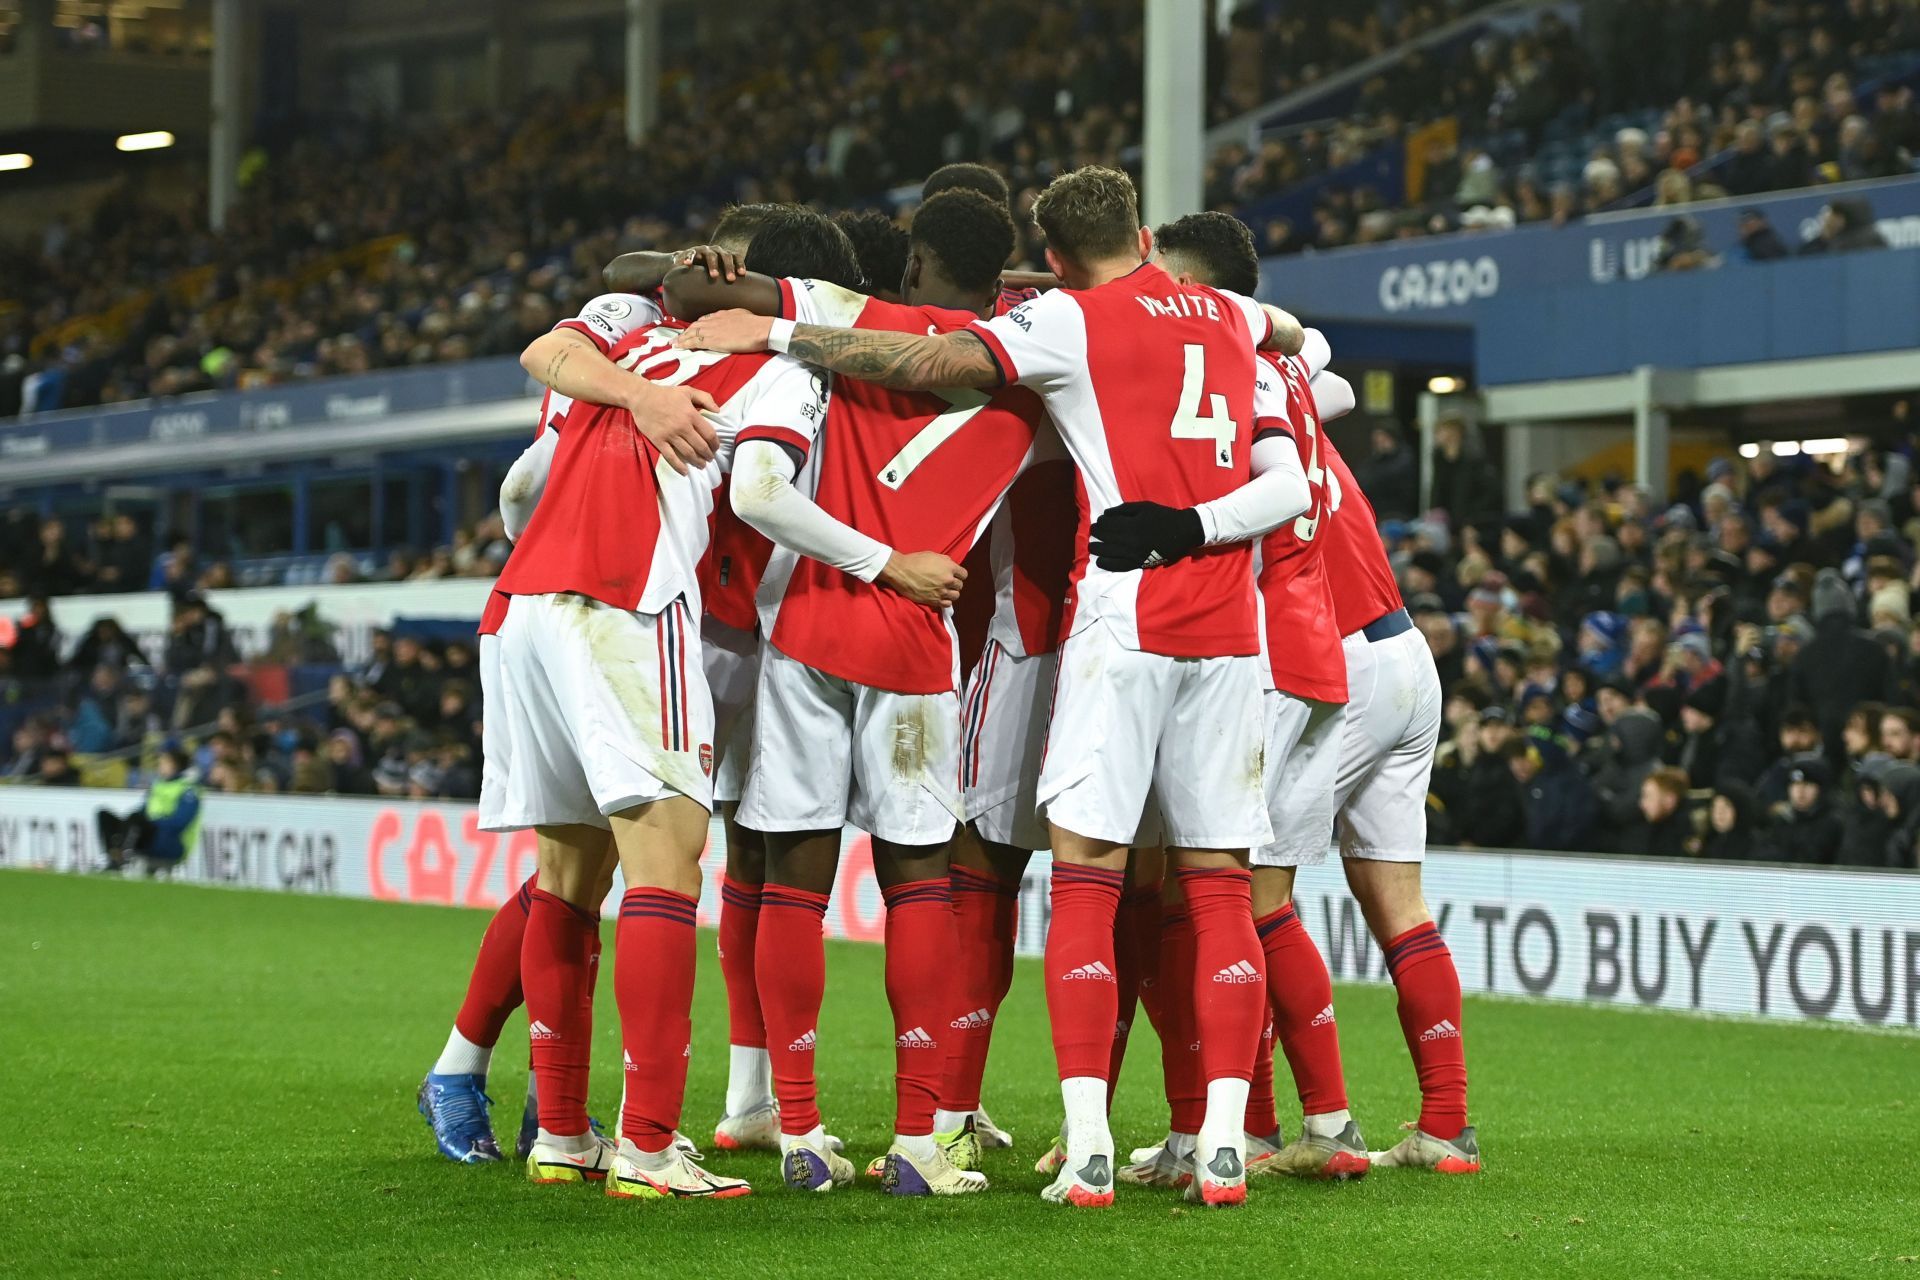 Arsenal suffered a 2-1 defeat to Everton in the Premier League on Monday